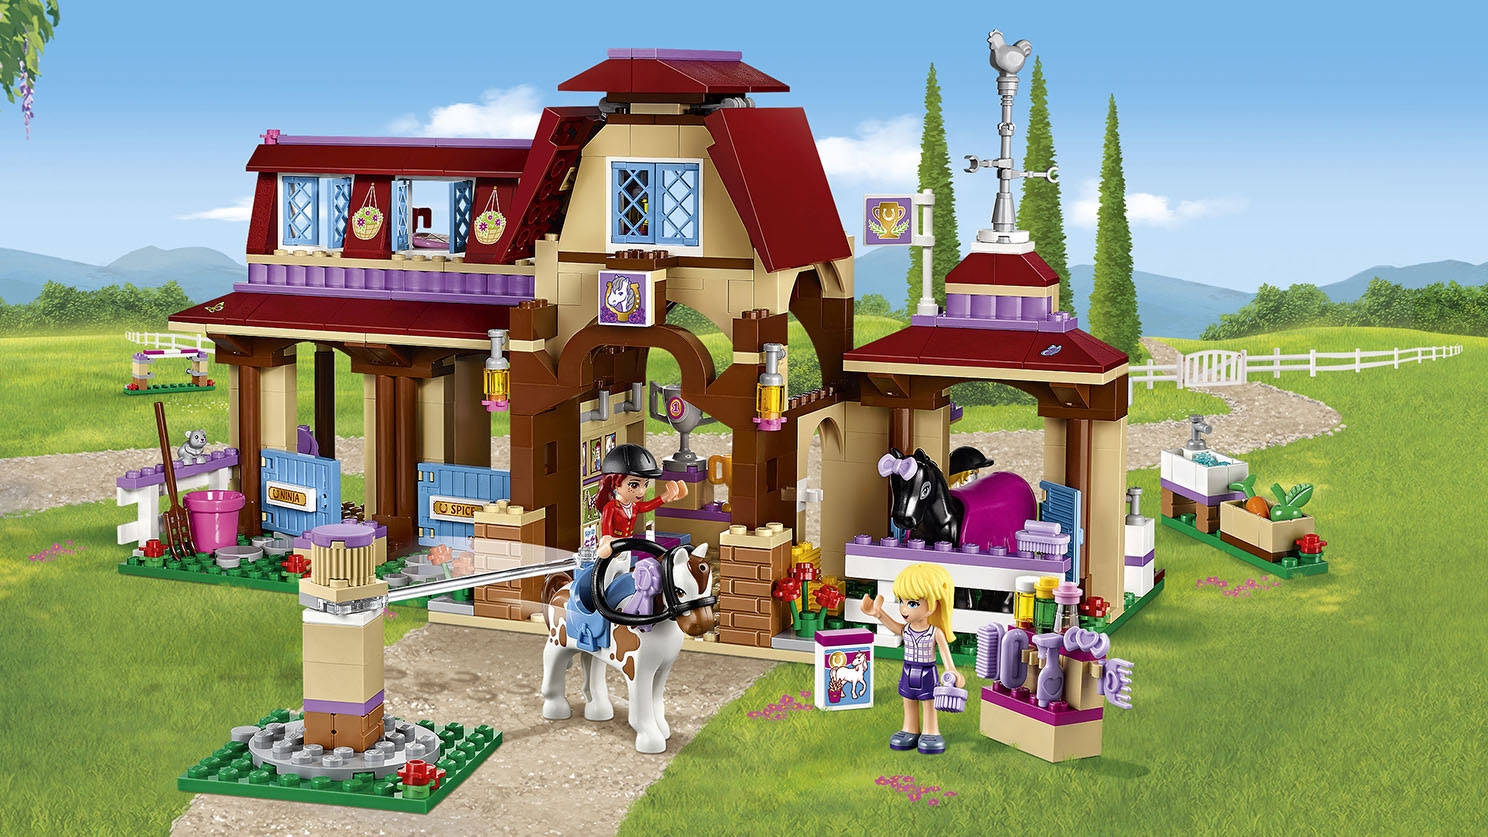 LEGO Friends - 41126 Heartlake Riding Club - Help Mia and Stephanie train and groom the horses at the riding club.